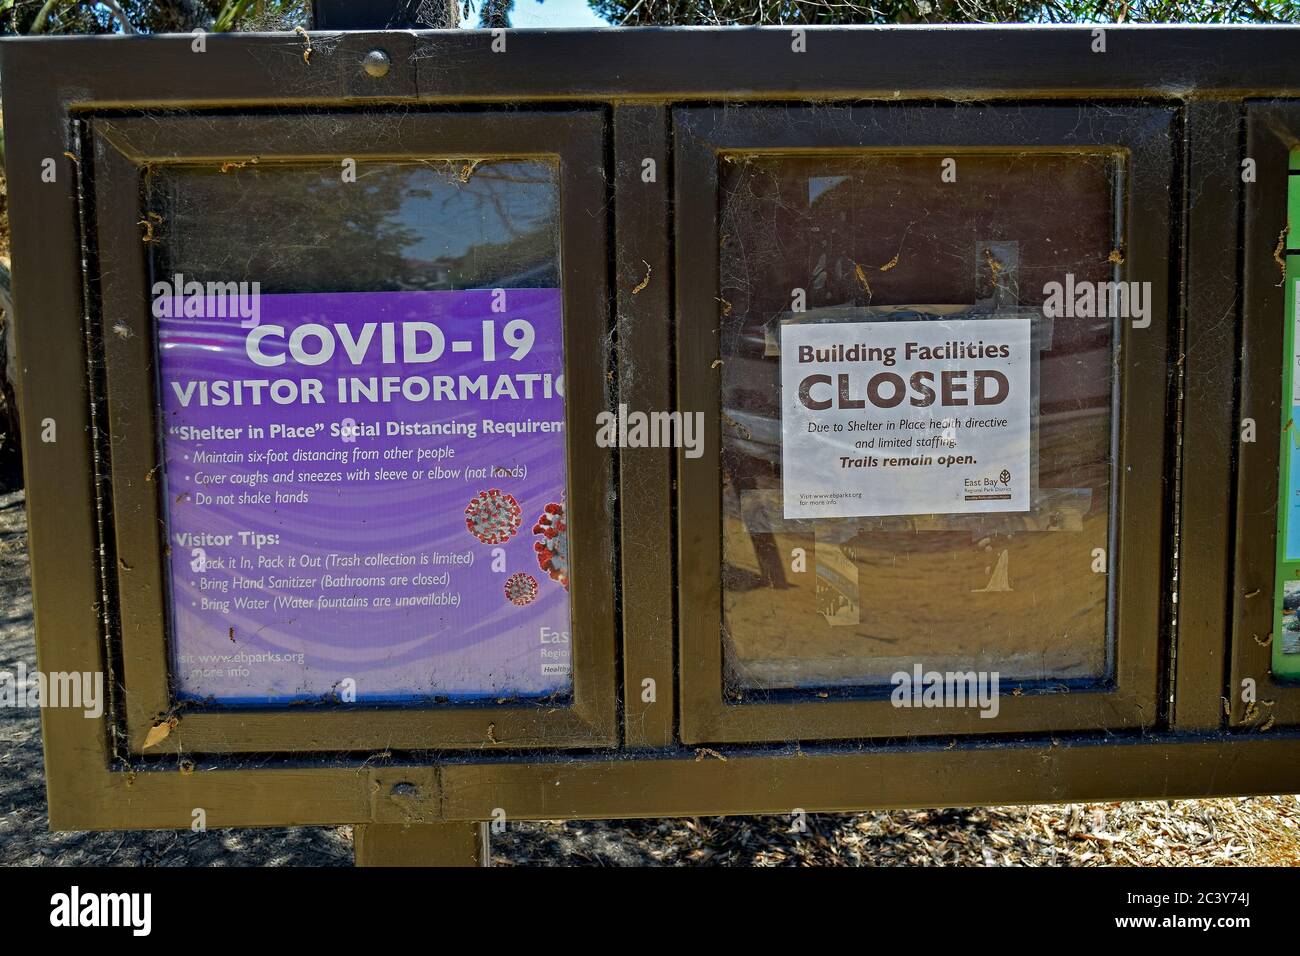 Covid-19 visitor information and building facilities closed, trails remain open, Alameda Creek Regional Trail Stables Staging Area, California Stock Photo